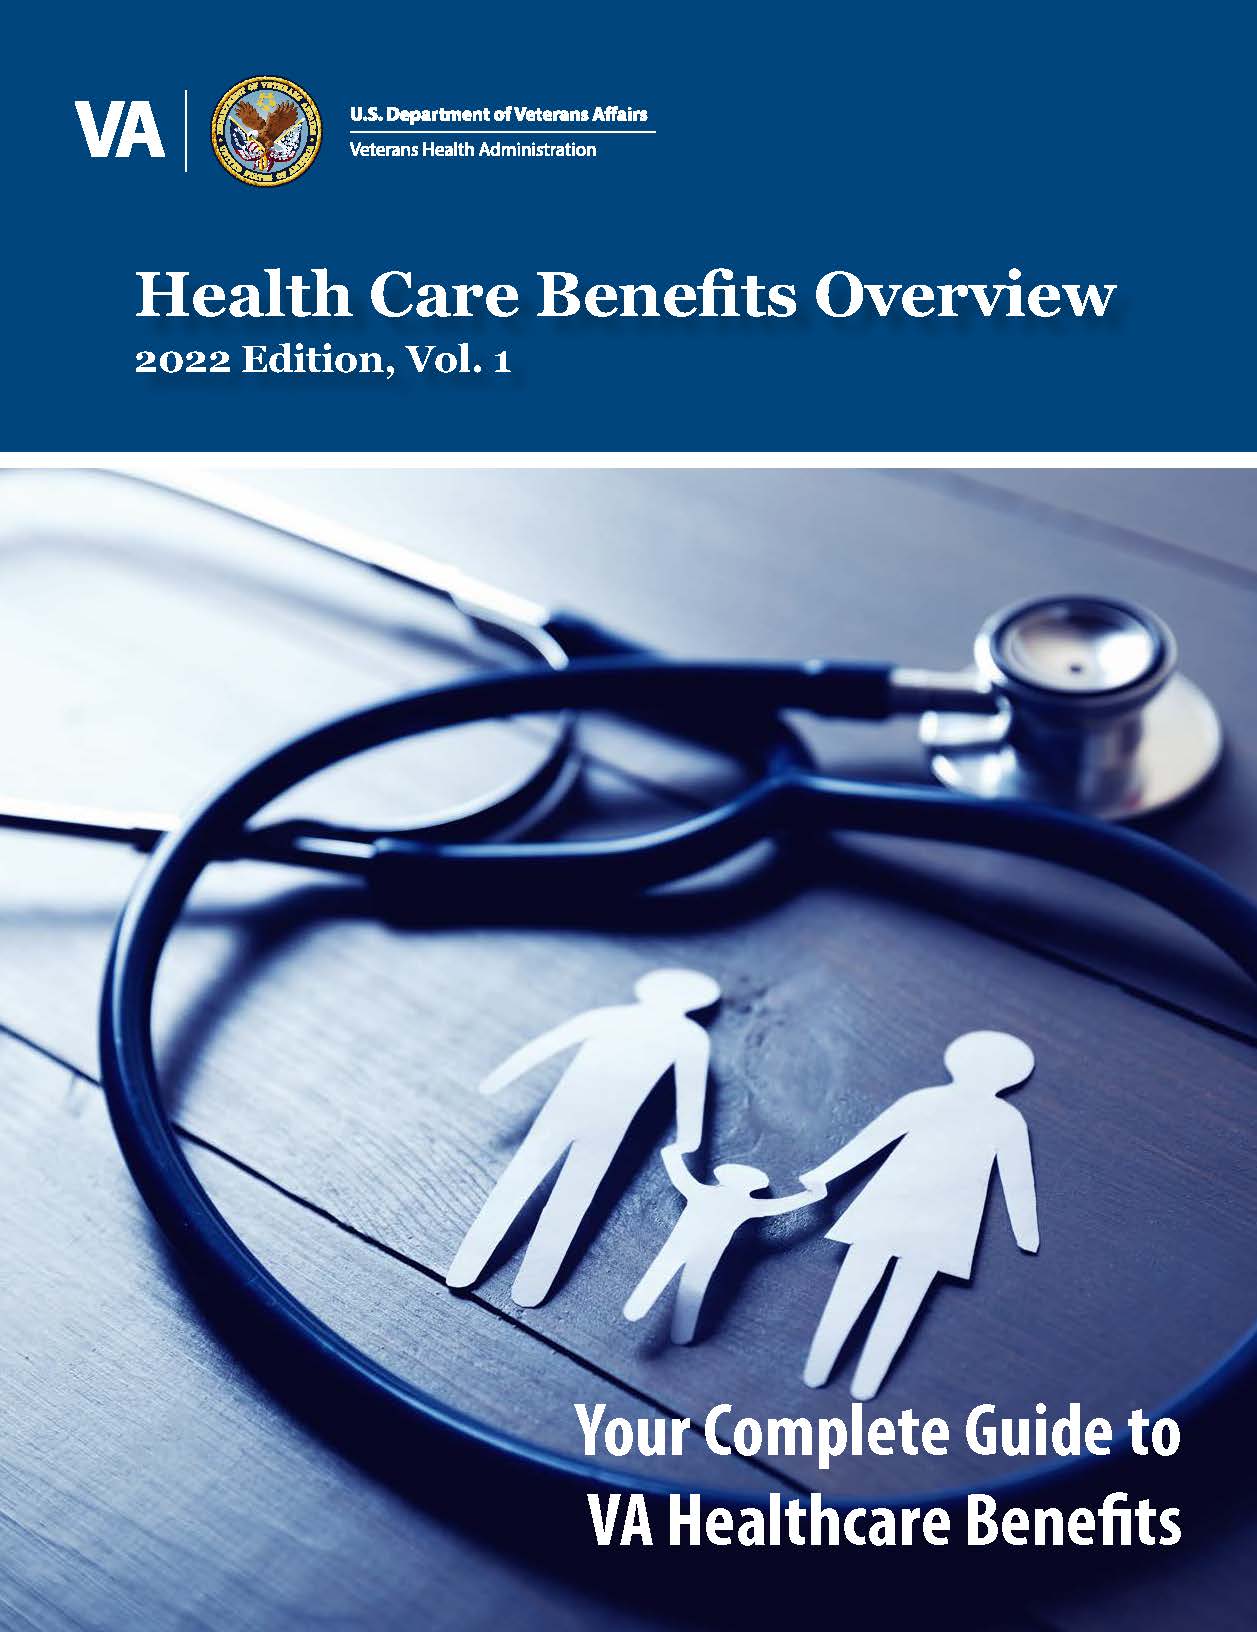 IB 10-185 Health Care Benefits Overview 2022 V1